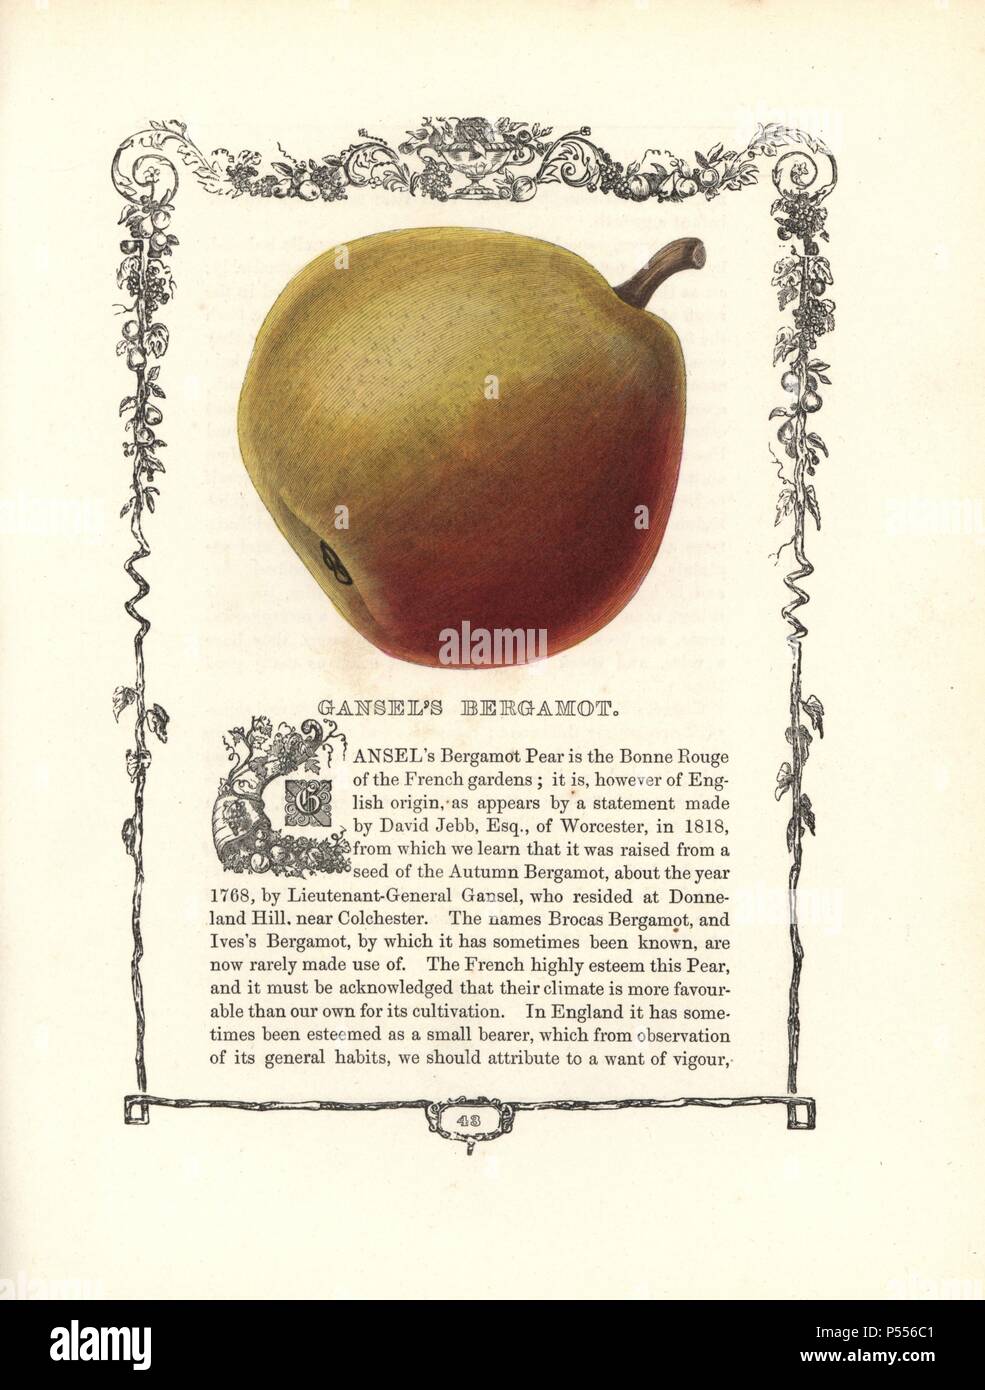 Gansel's Bergamot pear, Pyrus communis, within a Della Robbia ornamental frame with text below. Handcoloured glyphograph from Benjamin Maund's 'The Fruitist,' London, 1850, Groombridge and Sons. Maund (1790–1863) was a pharmacist, botanist, printer, bookseller and publisher of 'The Botanic Garden' and 'The Botanist.'. Stock Photo